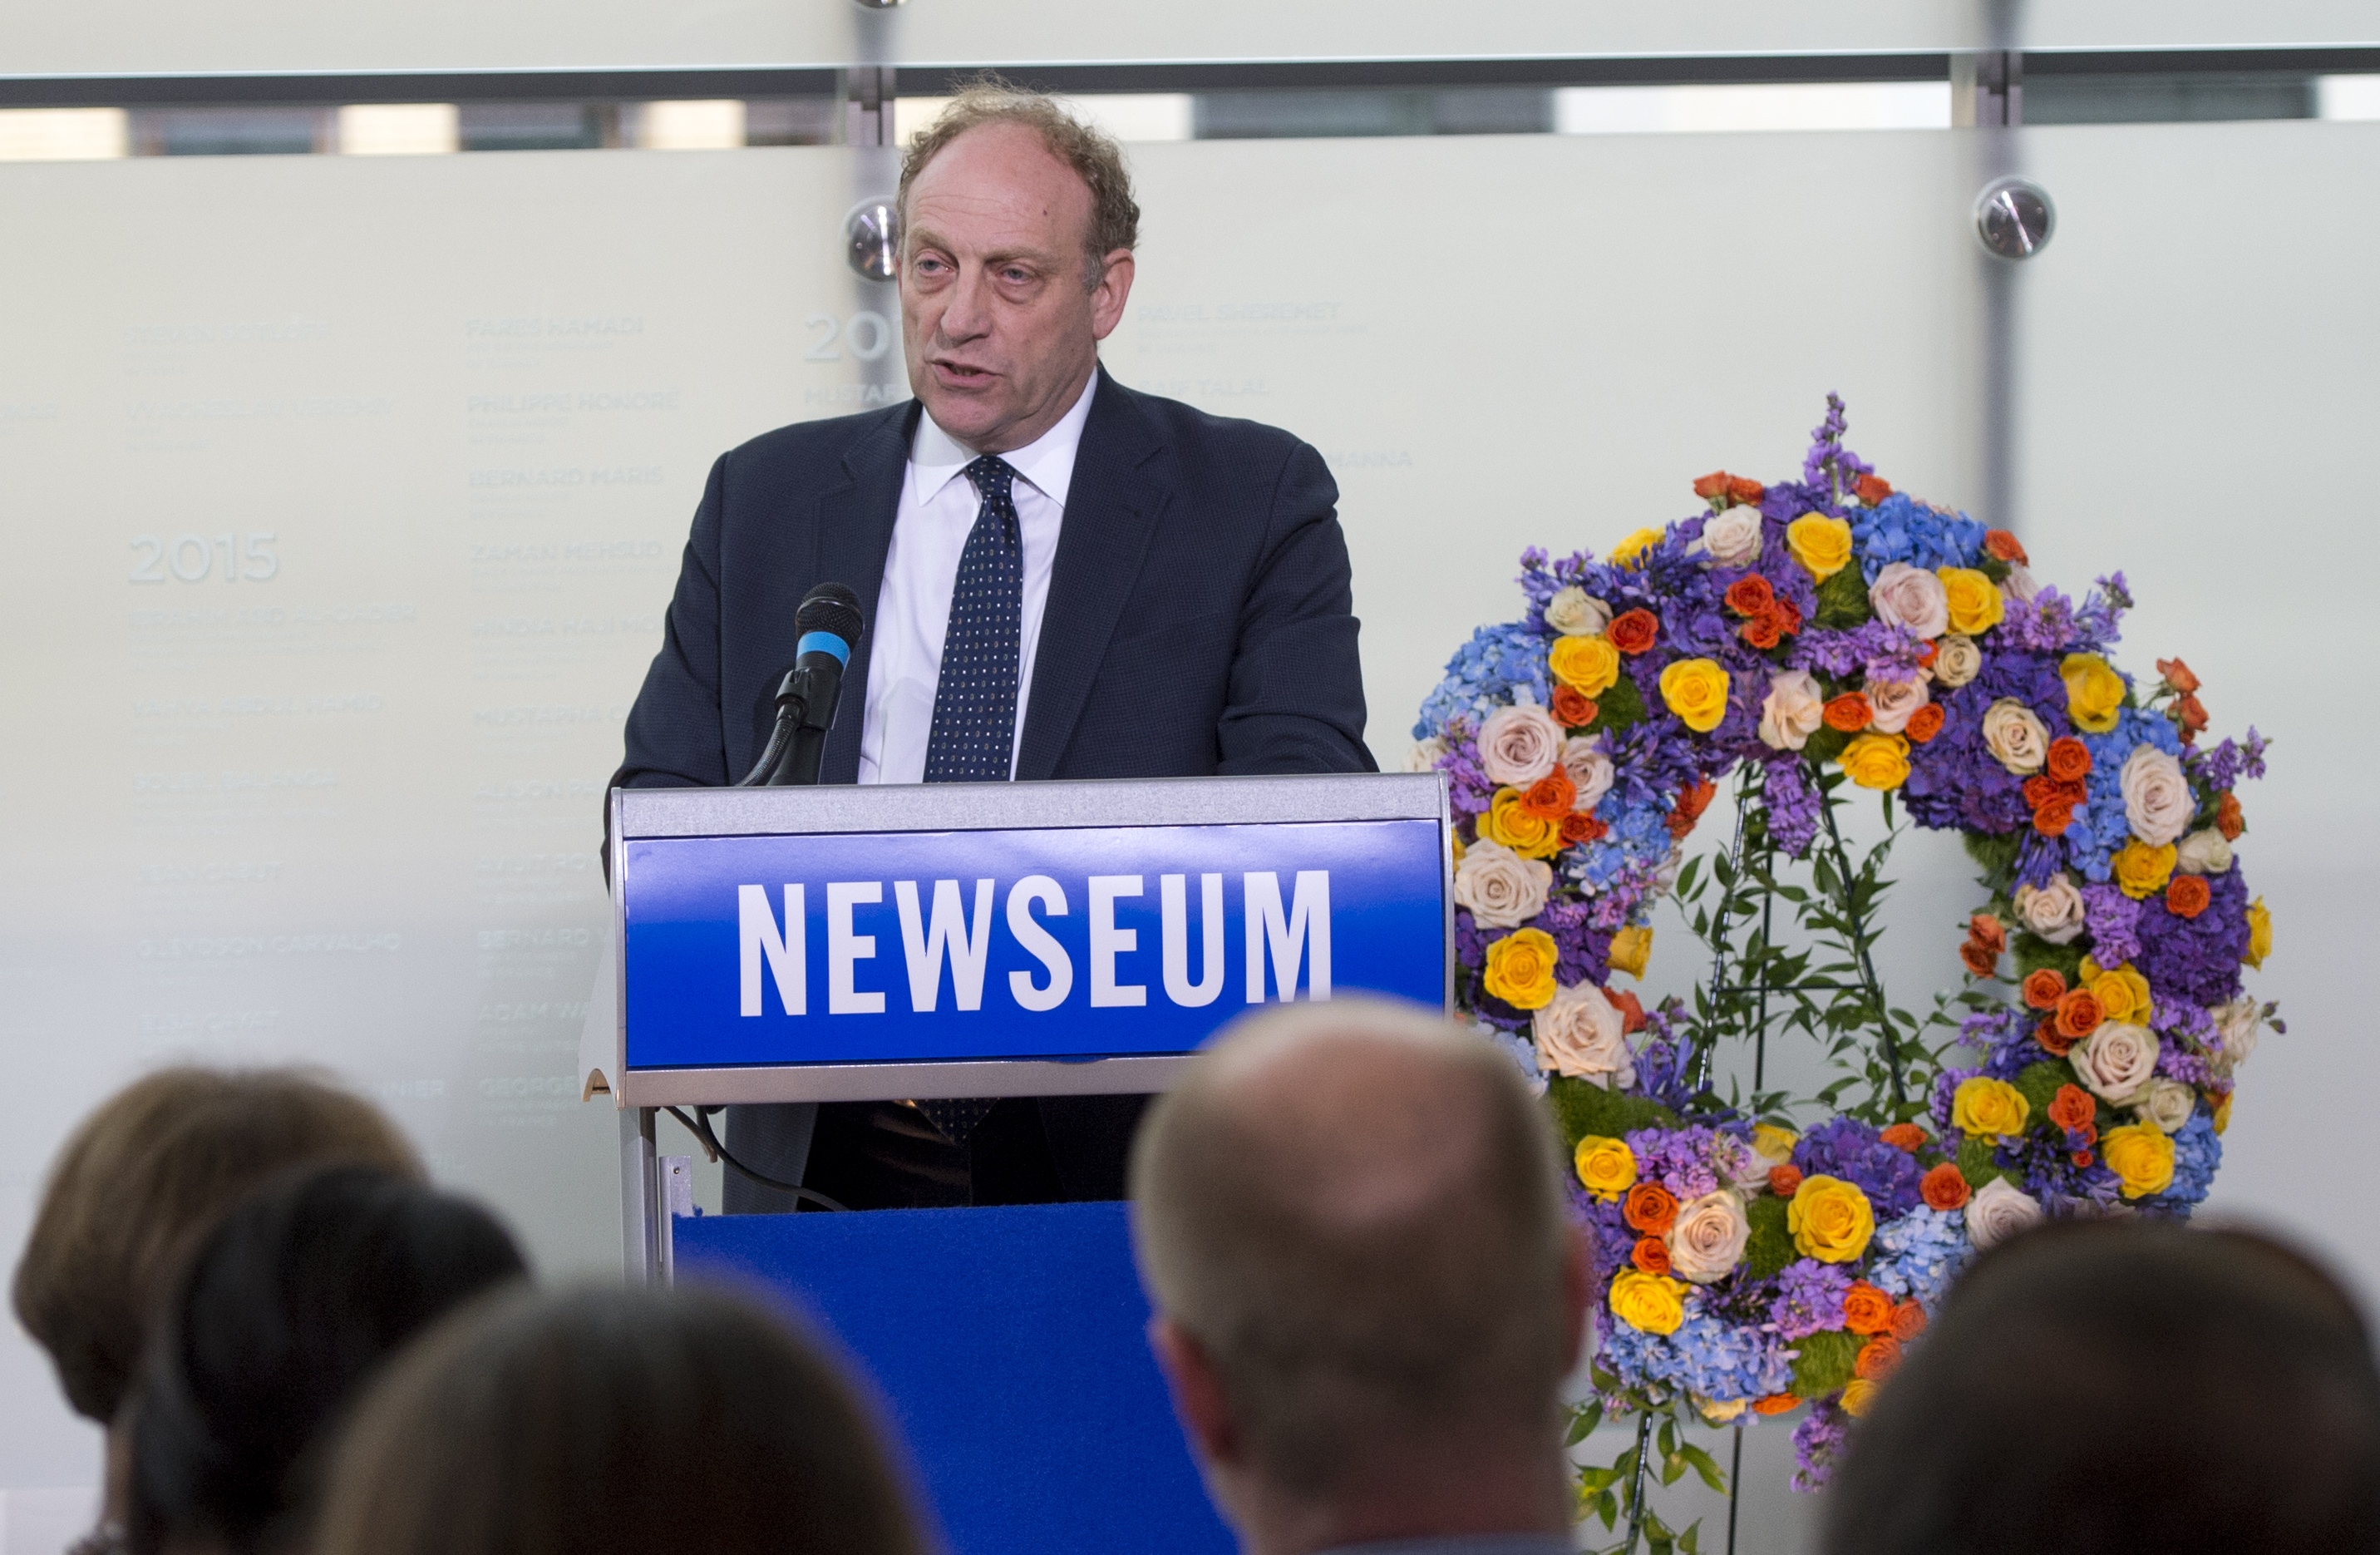 Michael Oreskes, senior vice president of news and editorial director of National Public Radio (NPR), speaks during the rededication of the Journalists Memorial at the Newseum in Washington, DC, June 5, 2017, as the names of 14 journalists who died or were killed while reporting the news in 2016 are added to the memorial. / AFP PHOTO / SAUL LOEB (Photo credit should read SAUL LOEB/AFP/Getty Images) (SAUL LOEB—AFP/Getty Images)